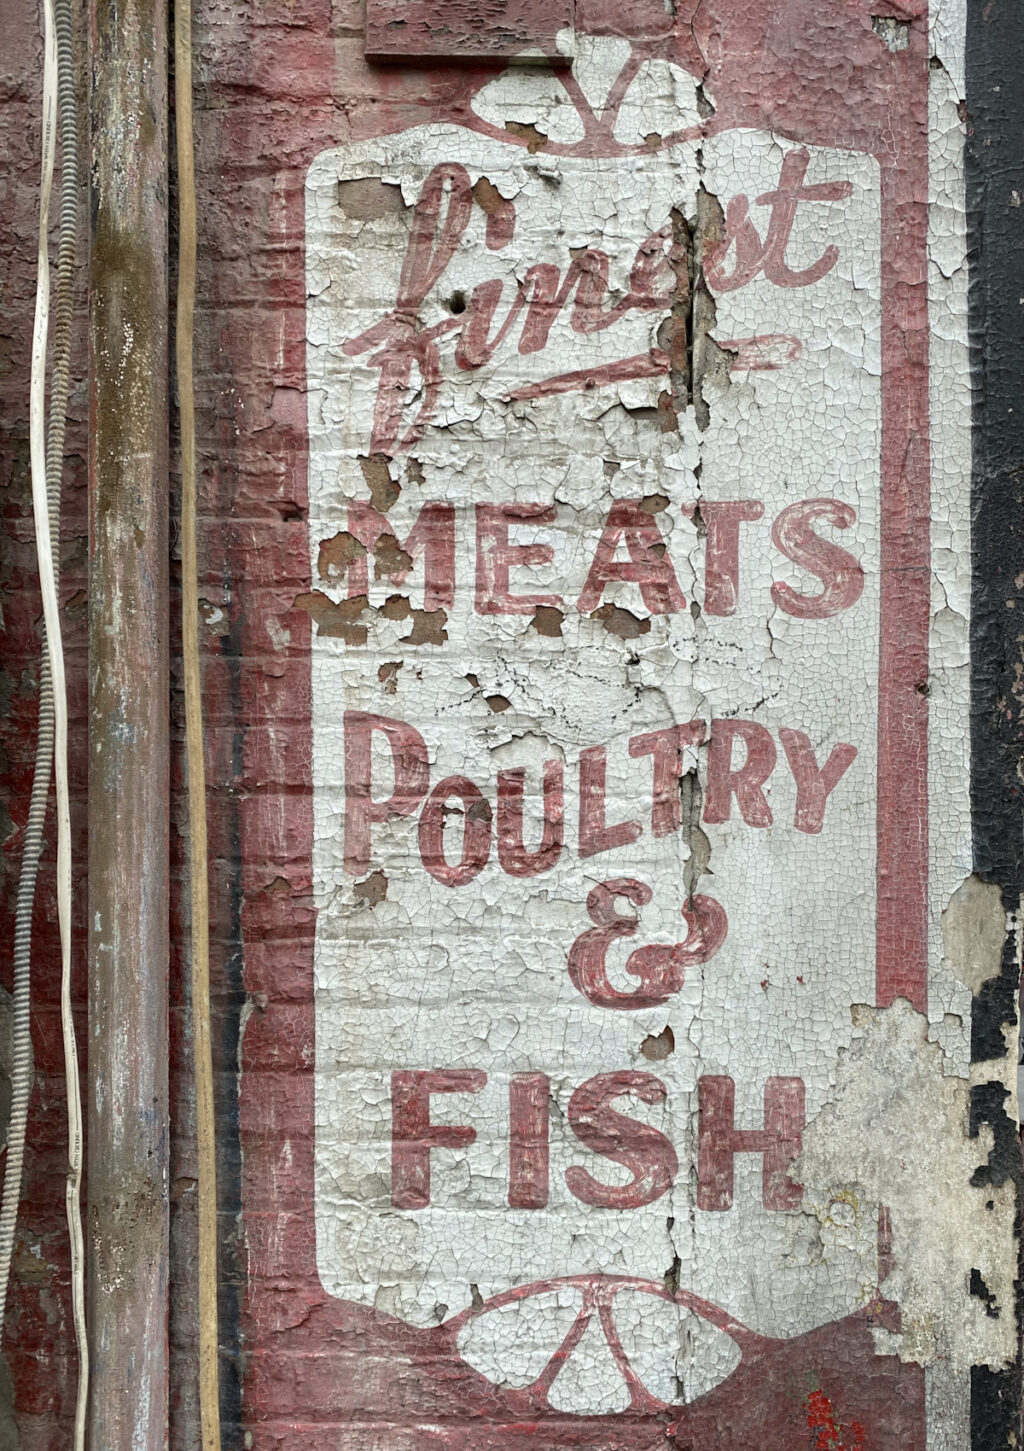 Fading painted sign on a brick wall. It is set within a white panel on a red background, with red lettering that reads: "Finest Meats, Poultry & Fish".